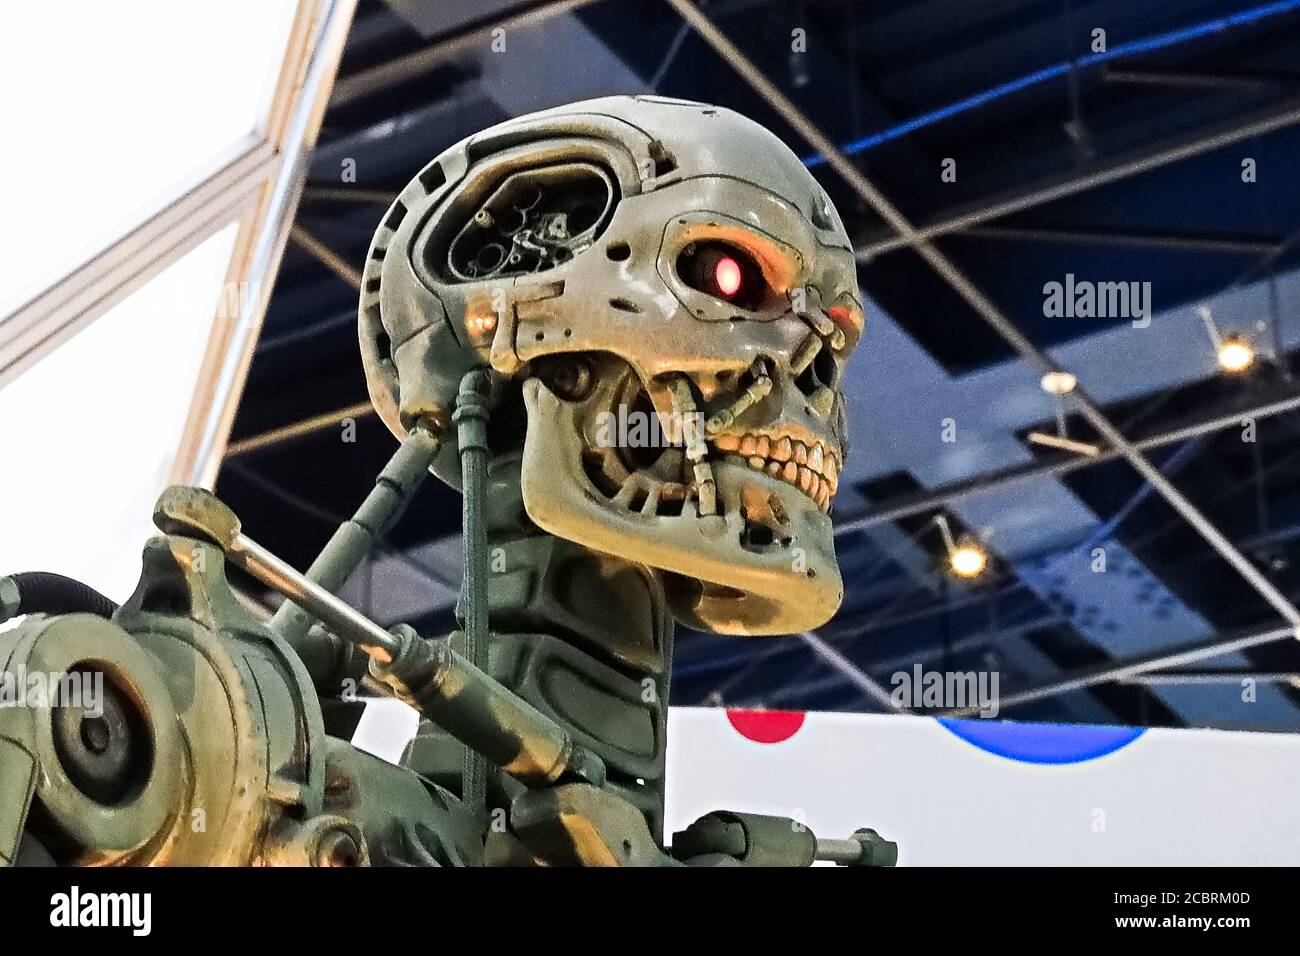 Terminator Robot High Resolution Stock Photography And Images Alamy